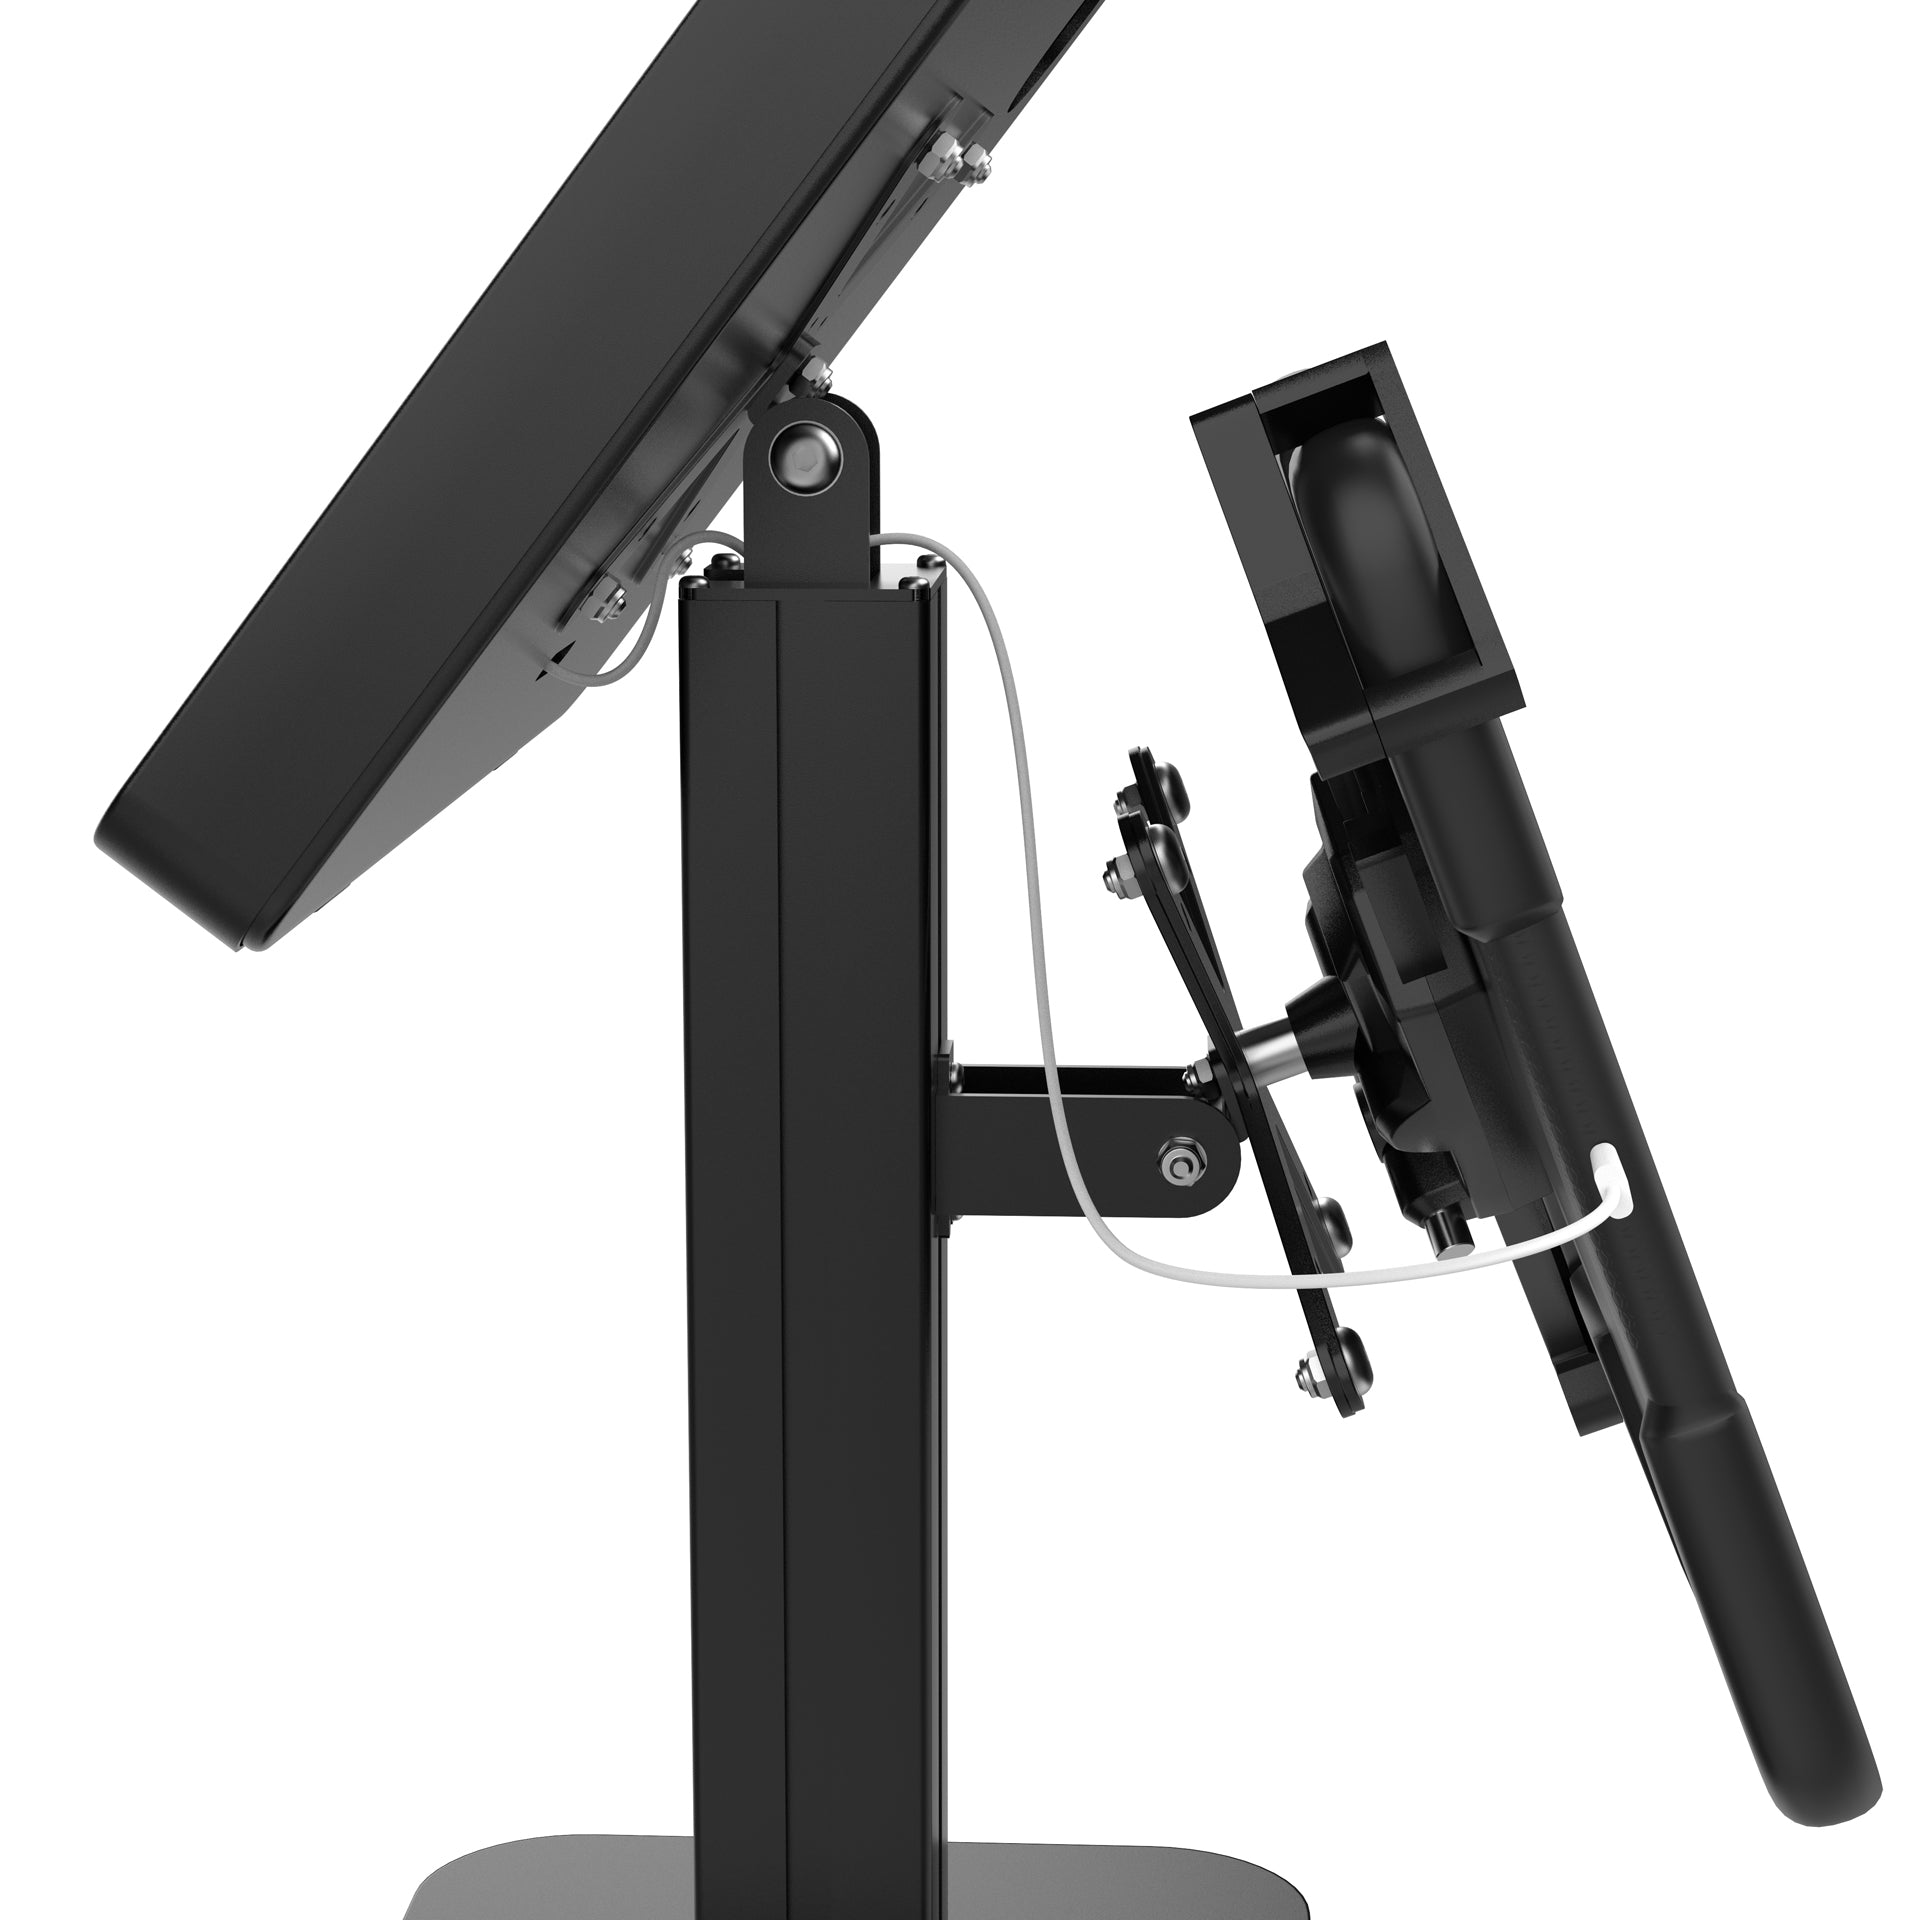 Adjustable Table Mount with Universal Security Holder and Universal Security Enclosure